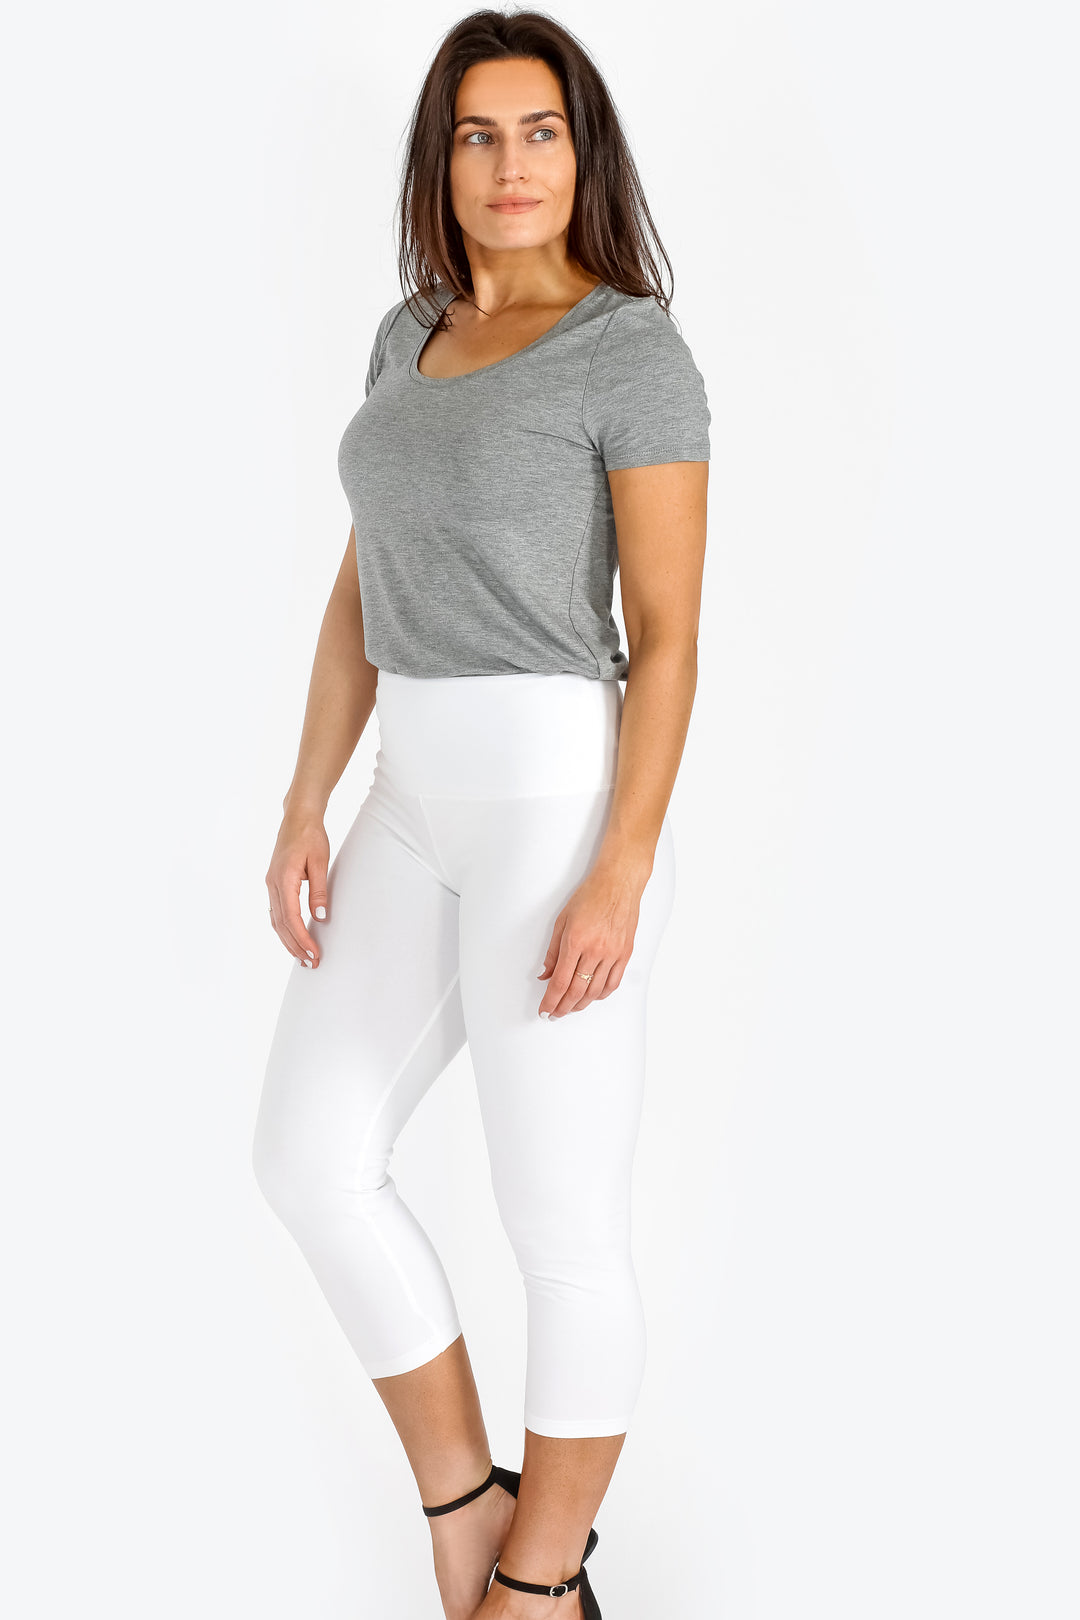 Intro Love The Fit women's Capri Leggings Size S White pull on Stretch NWT M